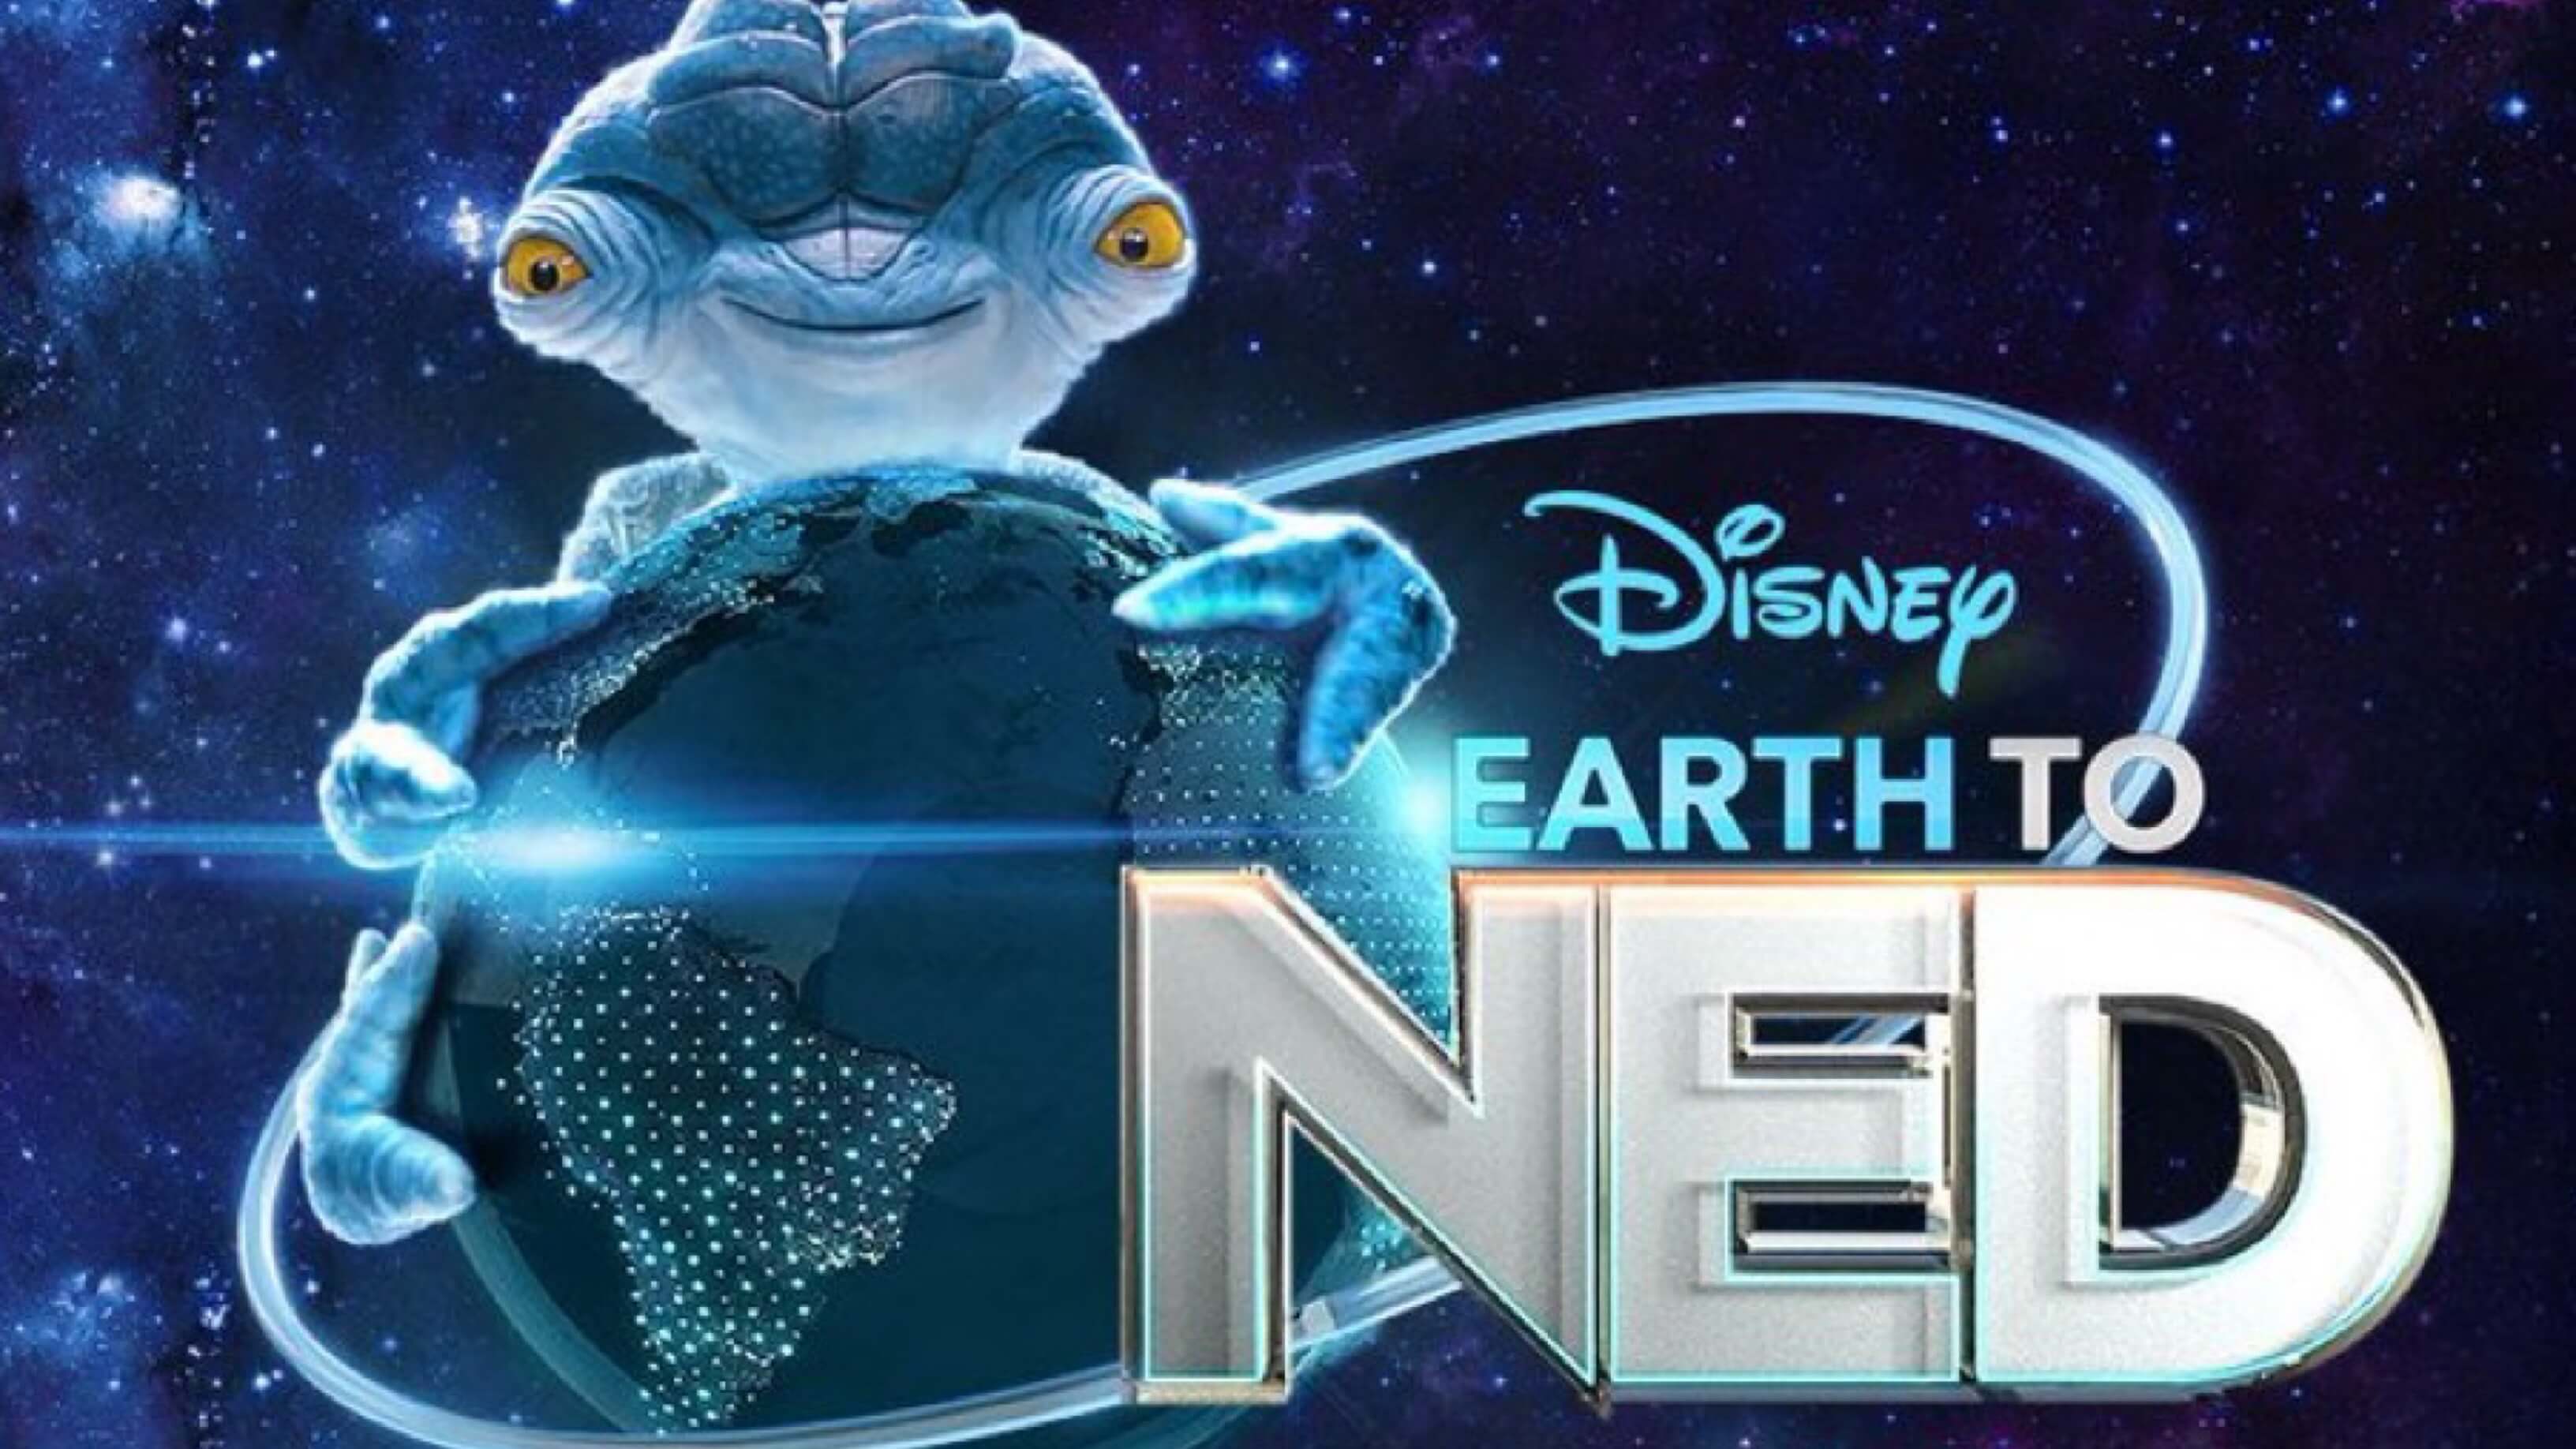 Disney+ Debuts ‘Earth to Ned’ Trailer and Poster